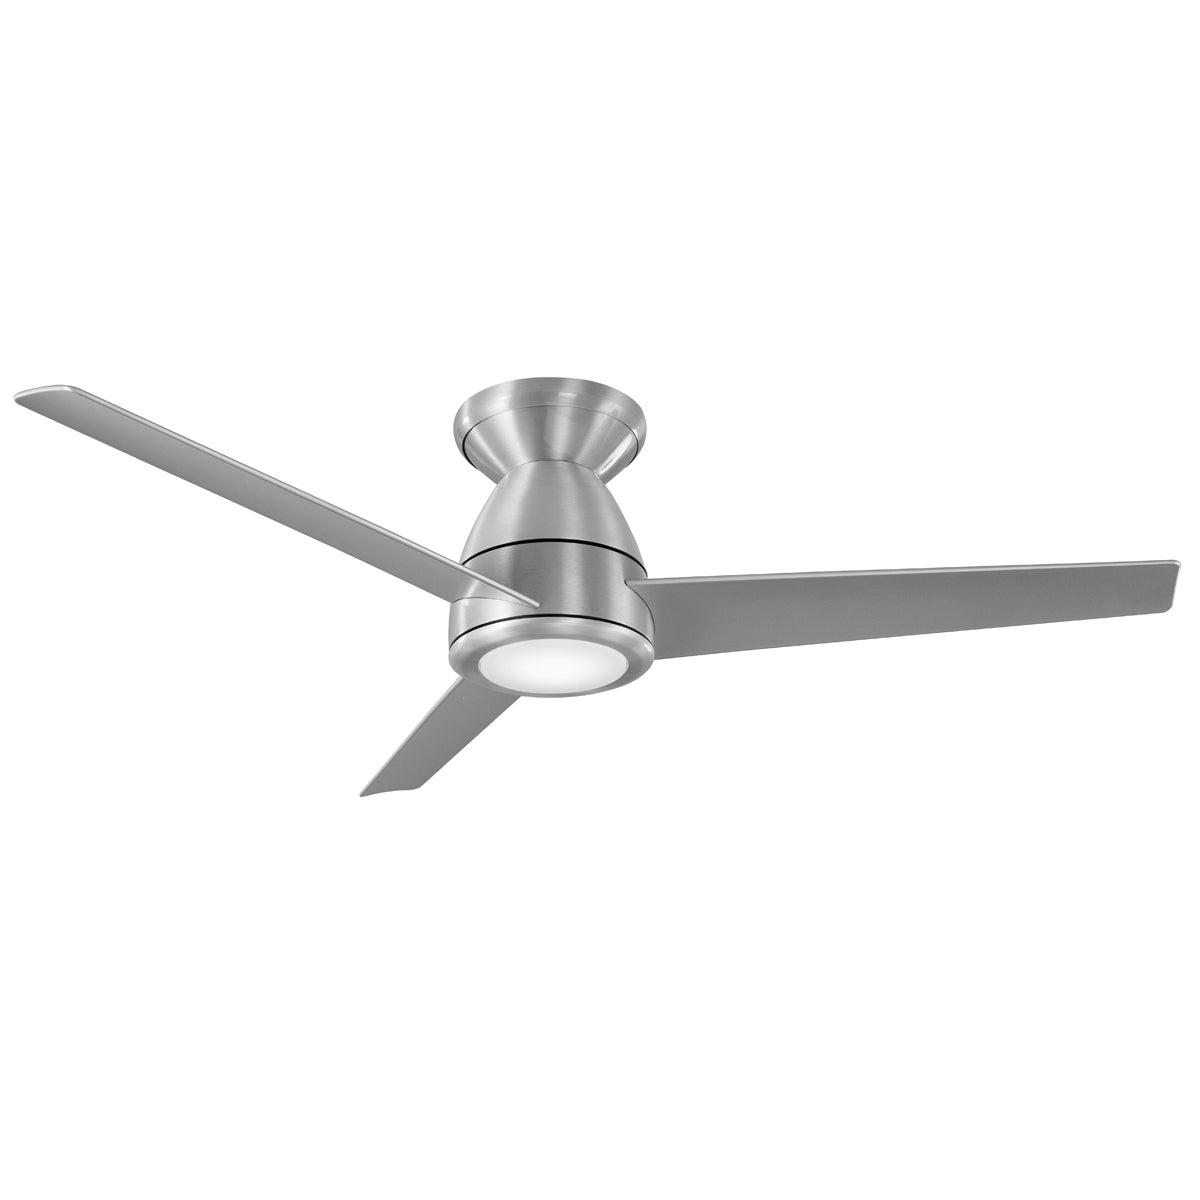 Tip-Top 52" Ceiling Fan in Brushed Aluminum from Modern Forms, item number FH-W2004-52L-BA